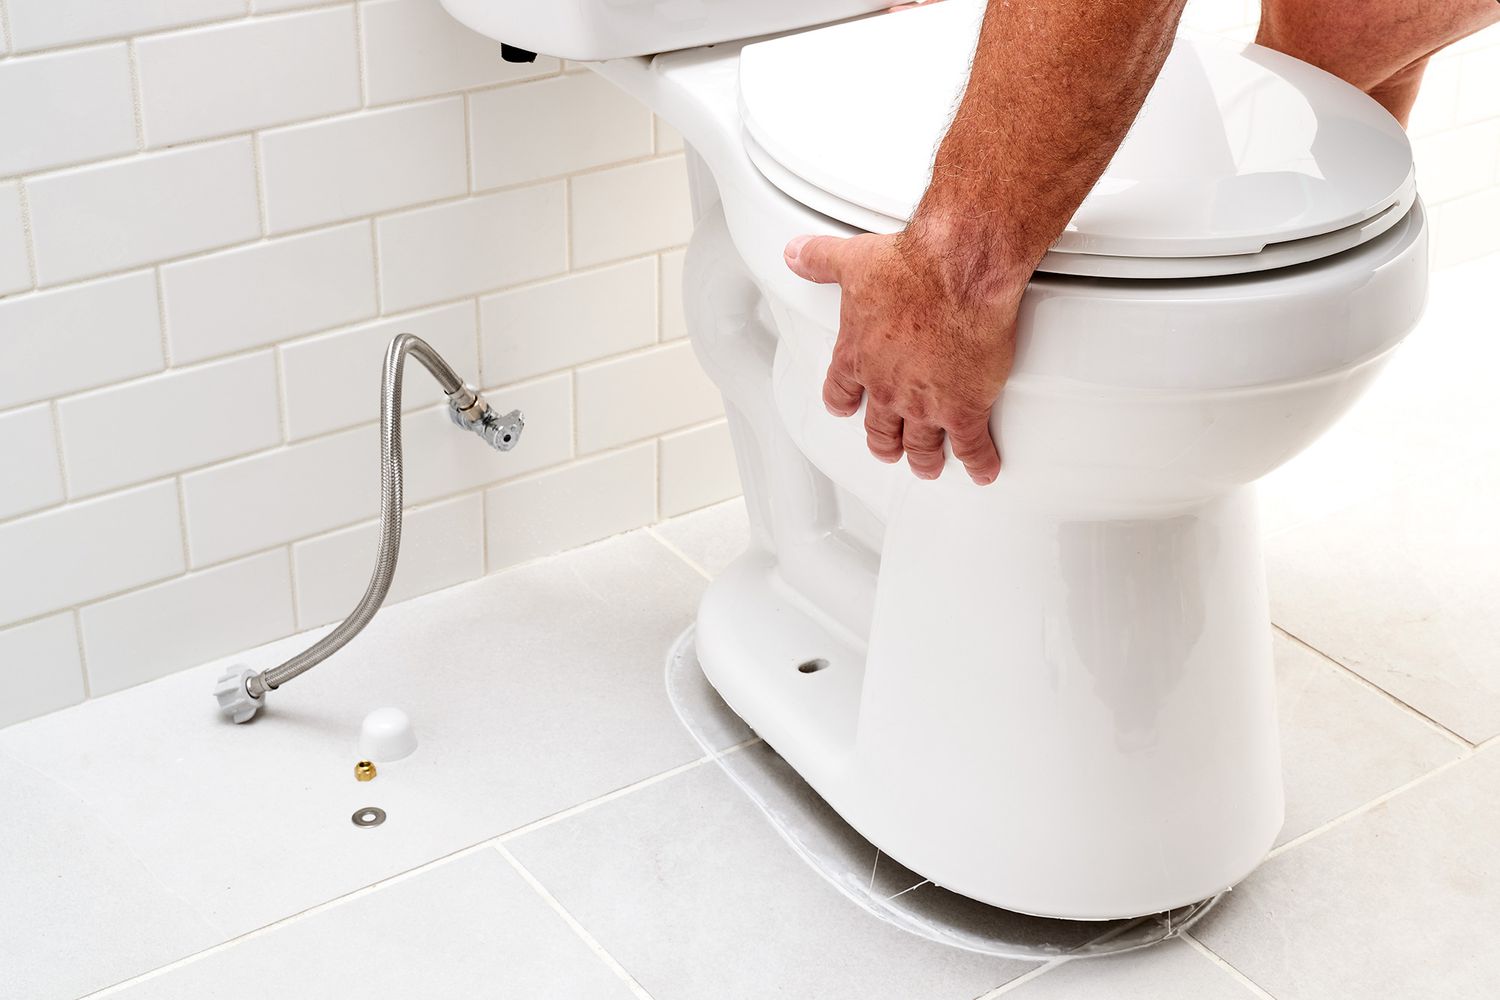 Plumbing codes require caulking a toilet to the floor